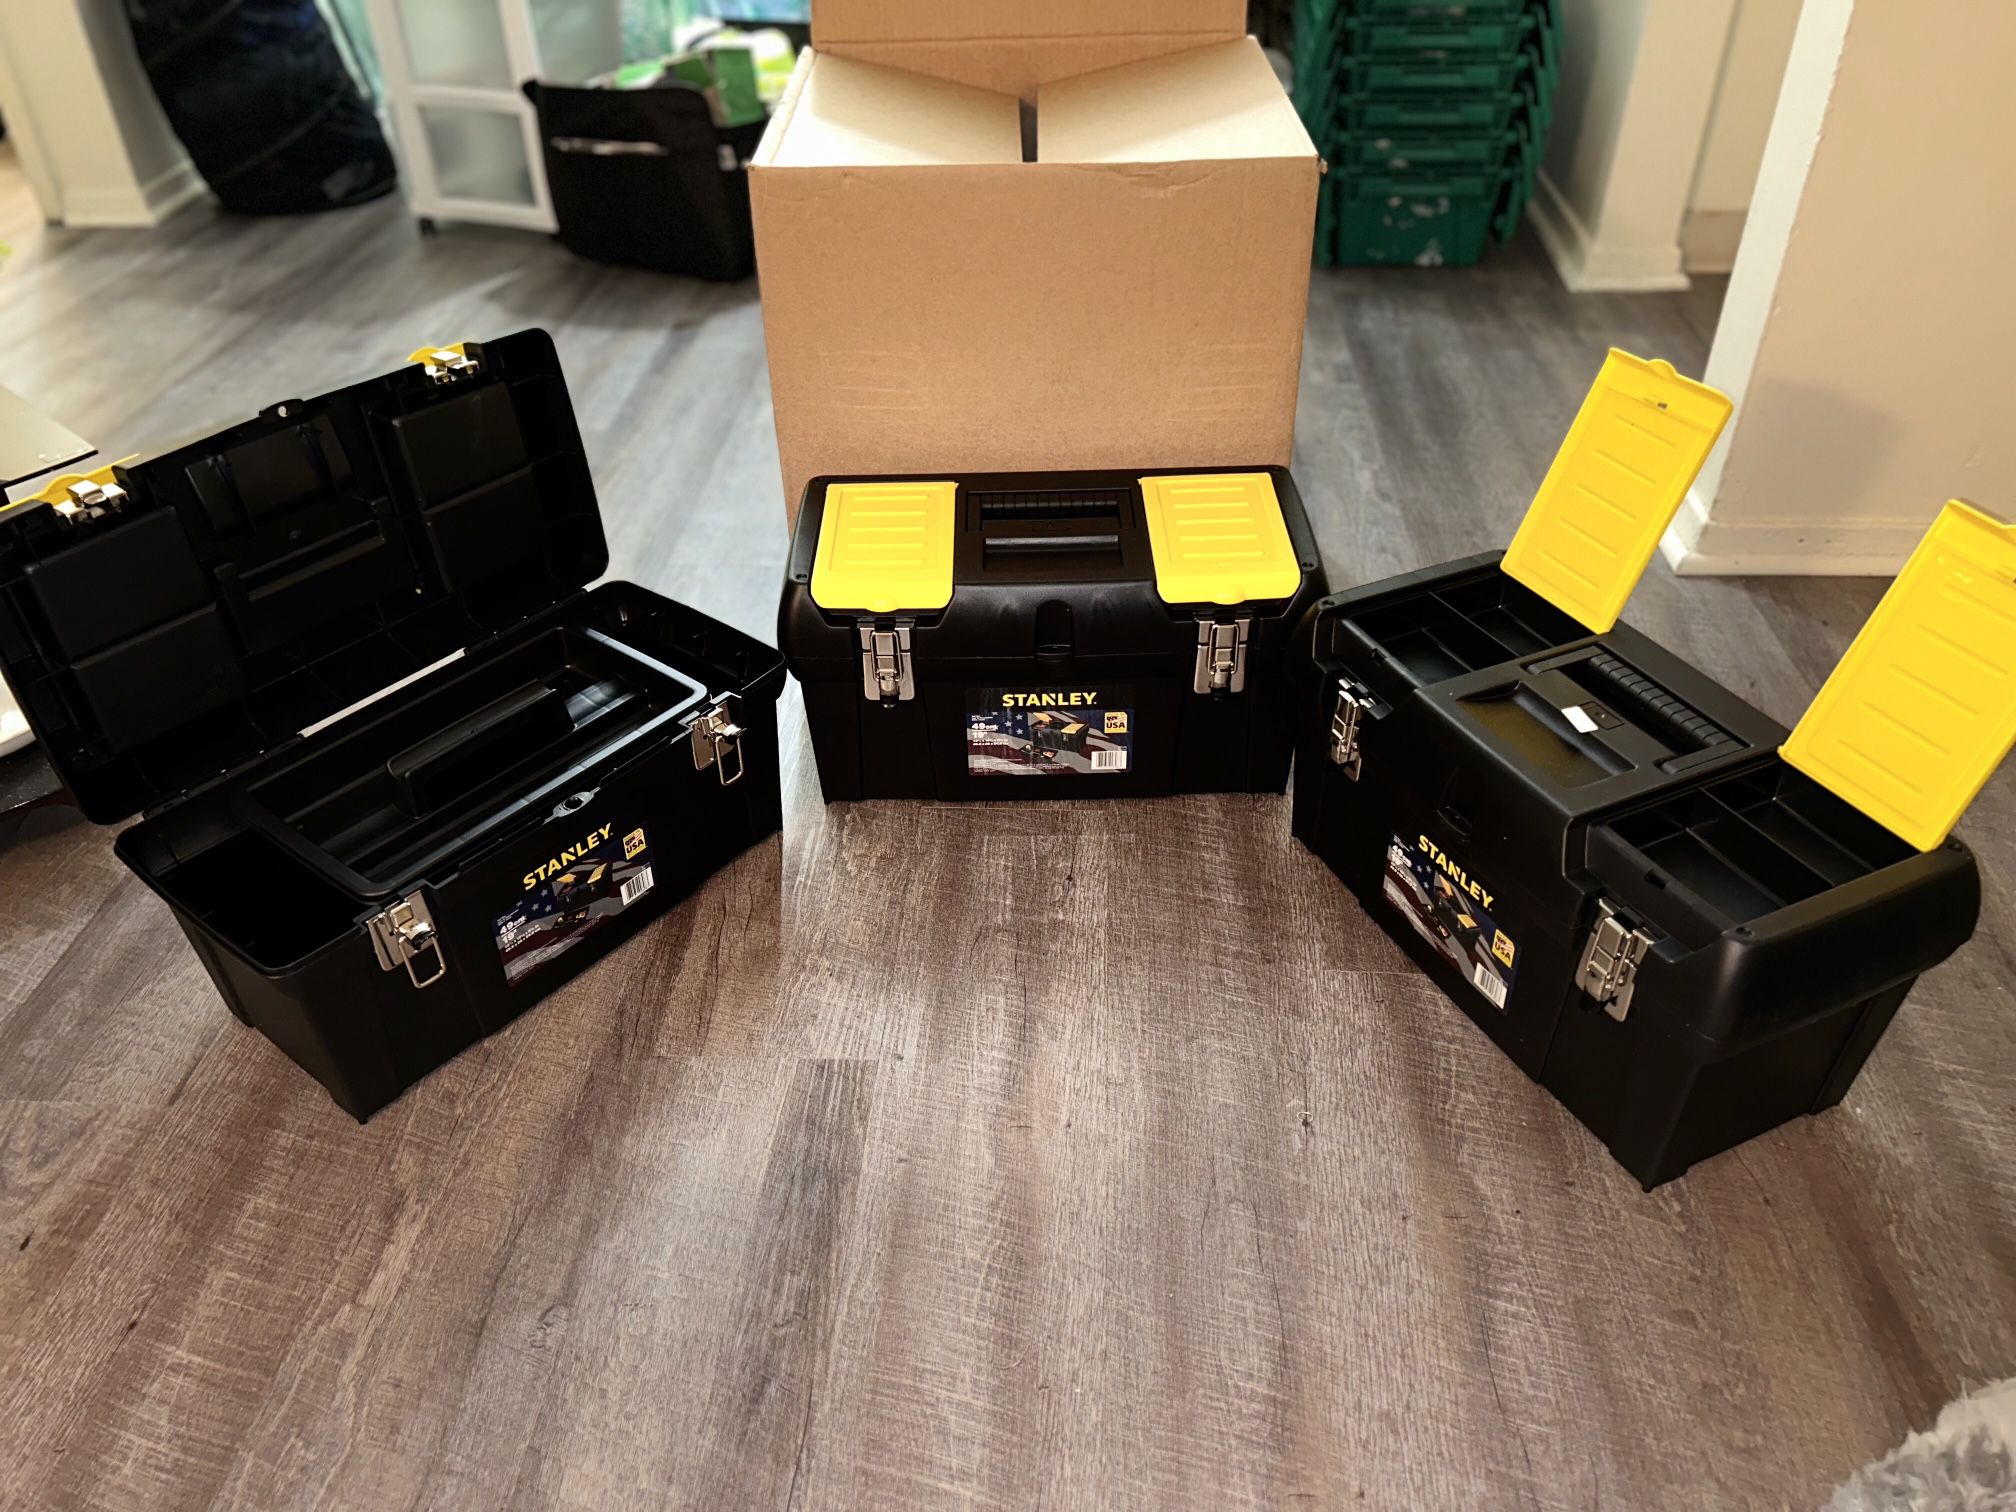 Stanley Toolboxes